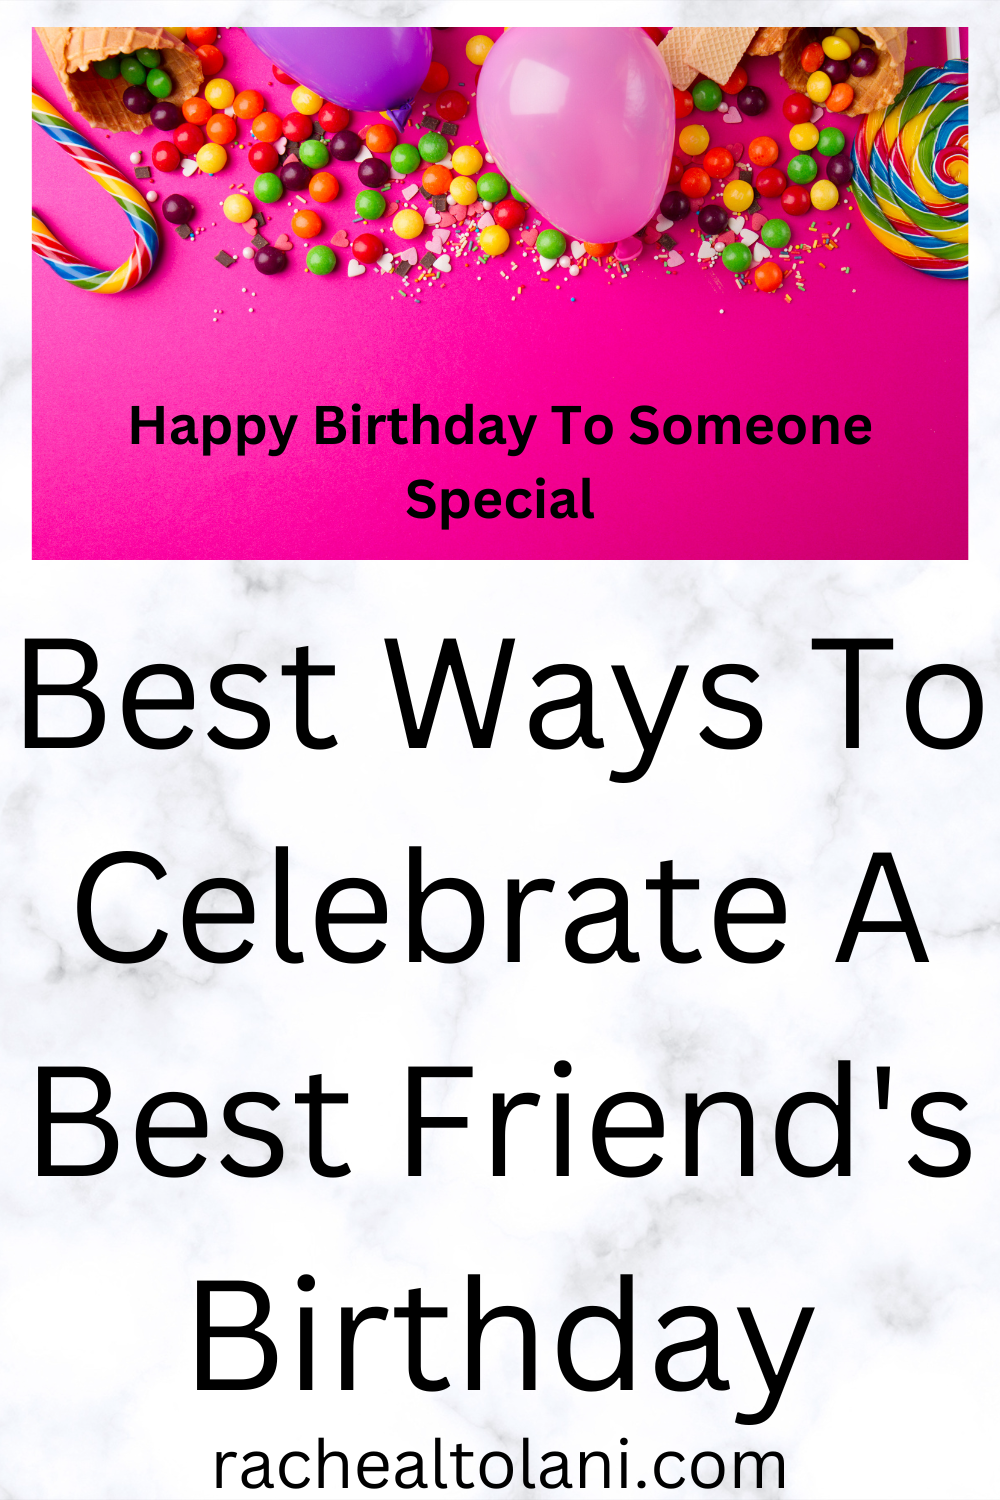 Birthday wishes for your friend